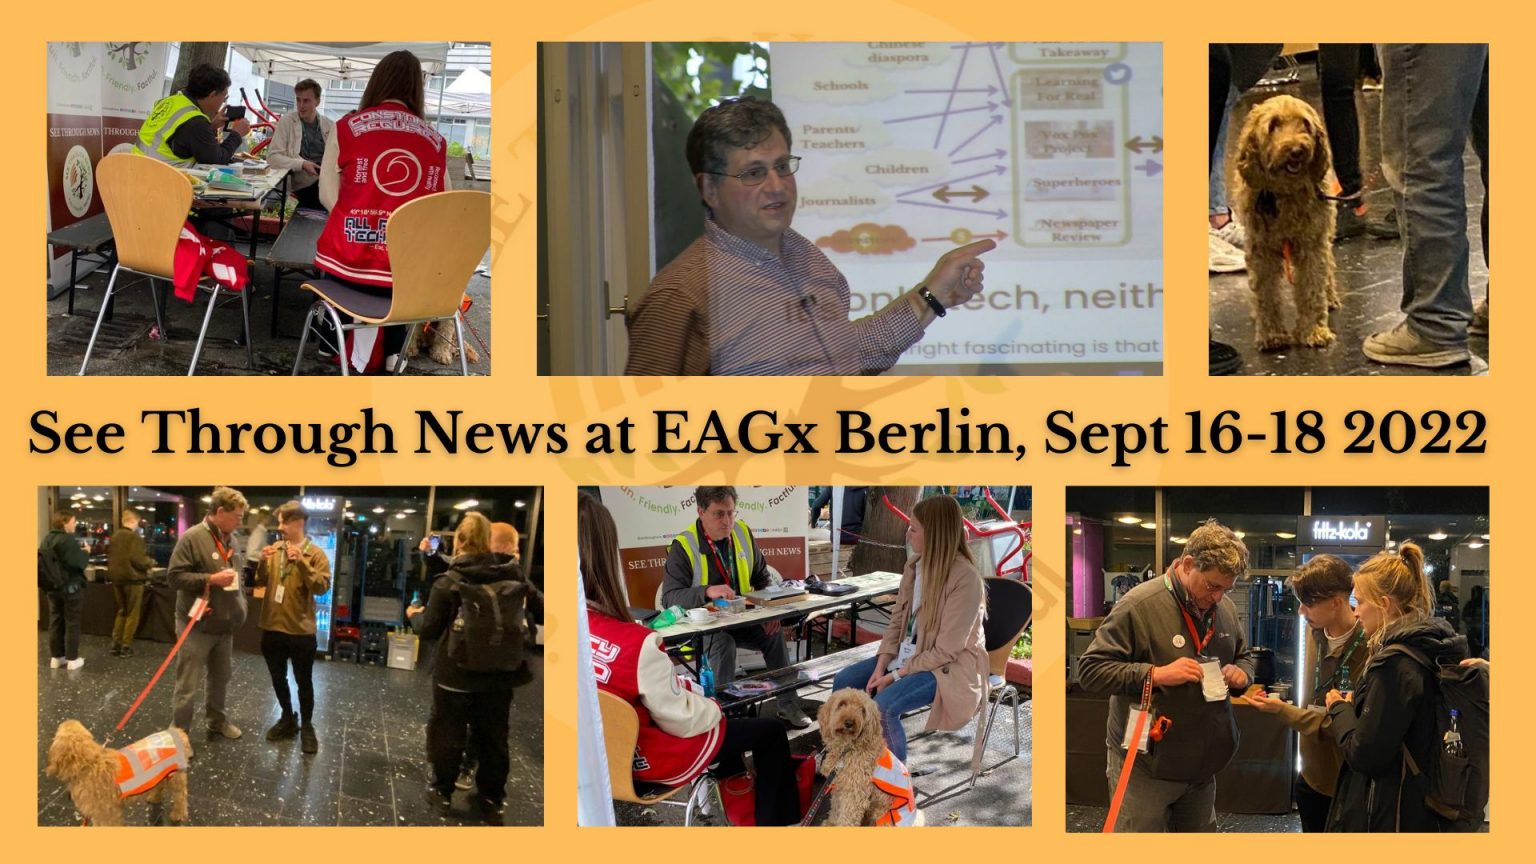 Effective Altruism EAGX Berlin STN see through news effective climate action acvitism